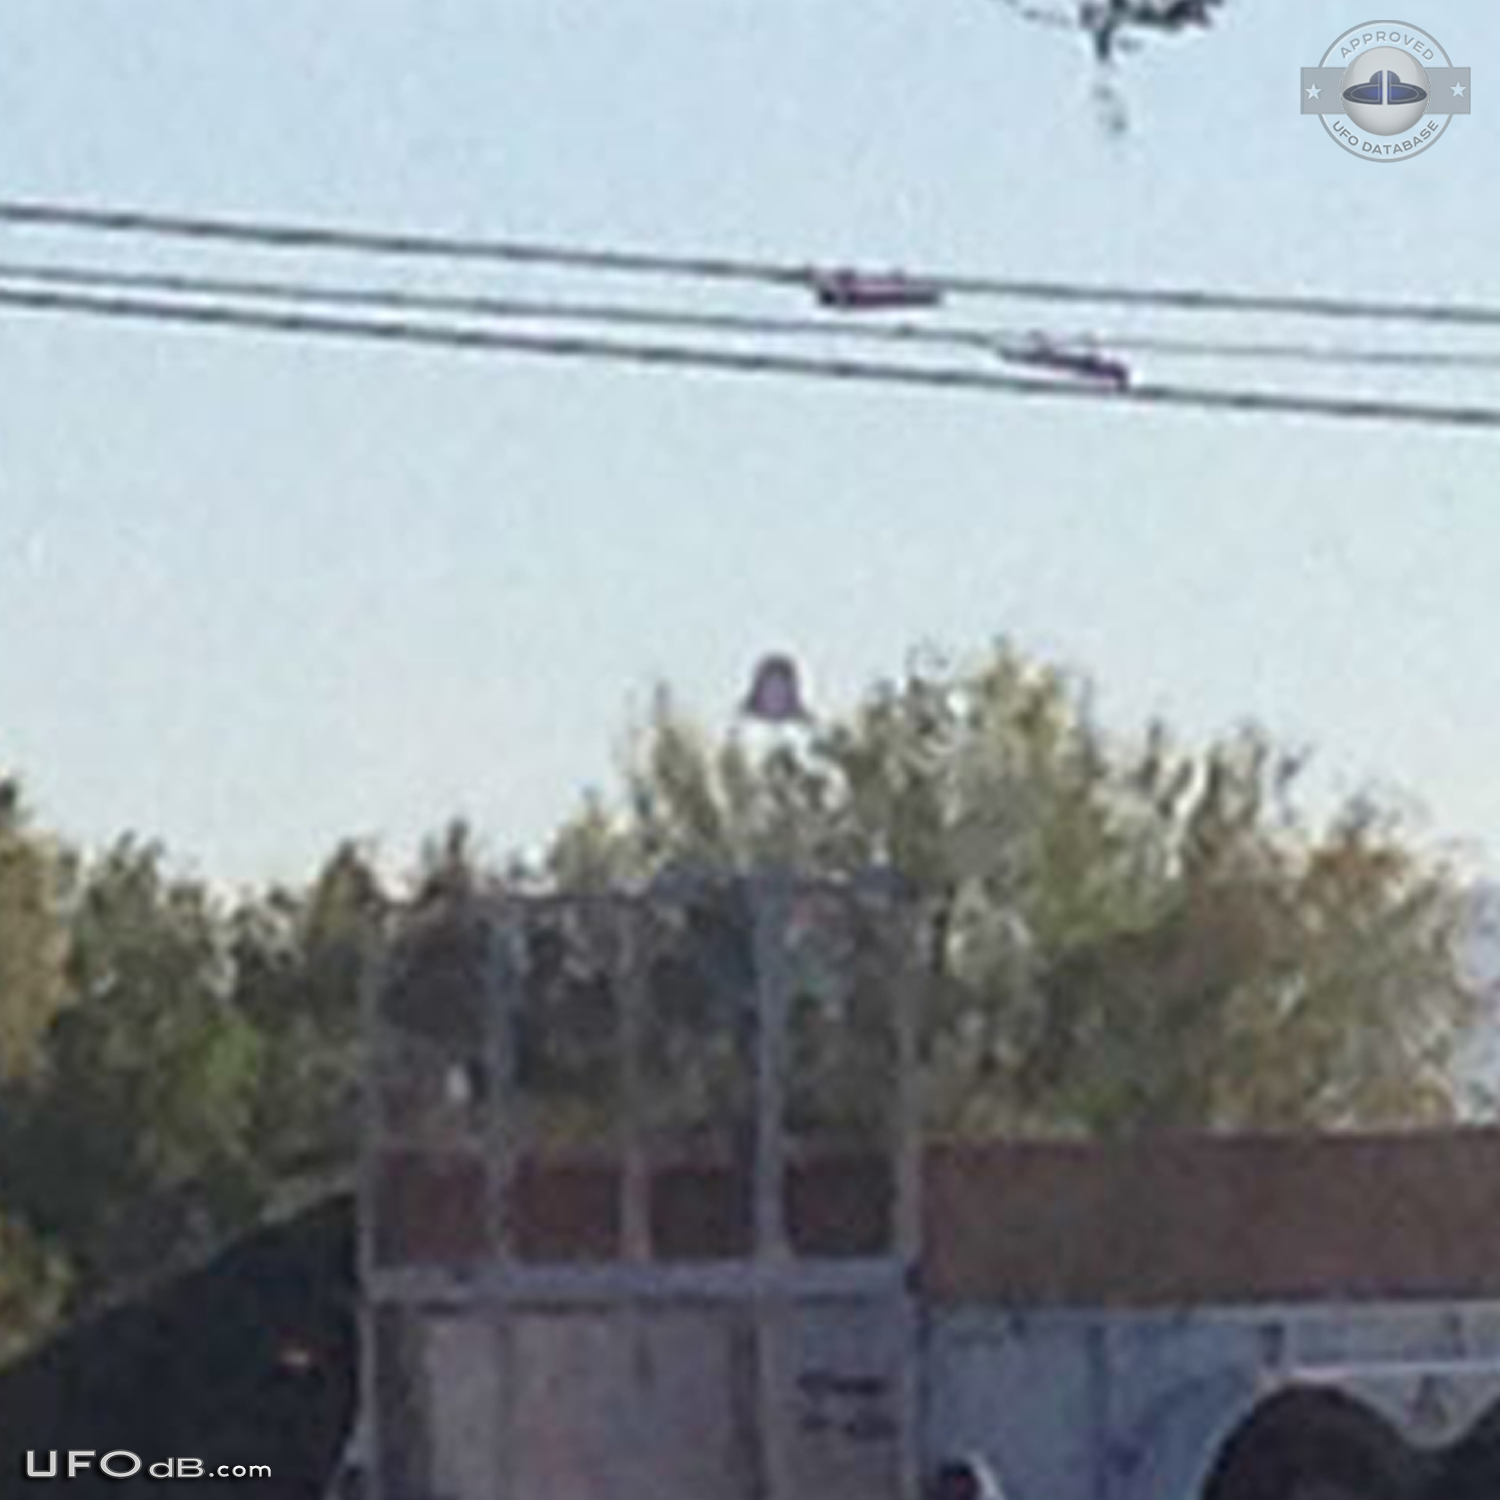 Massive Bell Shaped UFO over Sawtooth National Forest in Idaho 2014 UFO Picture #566-5